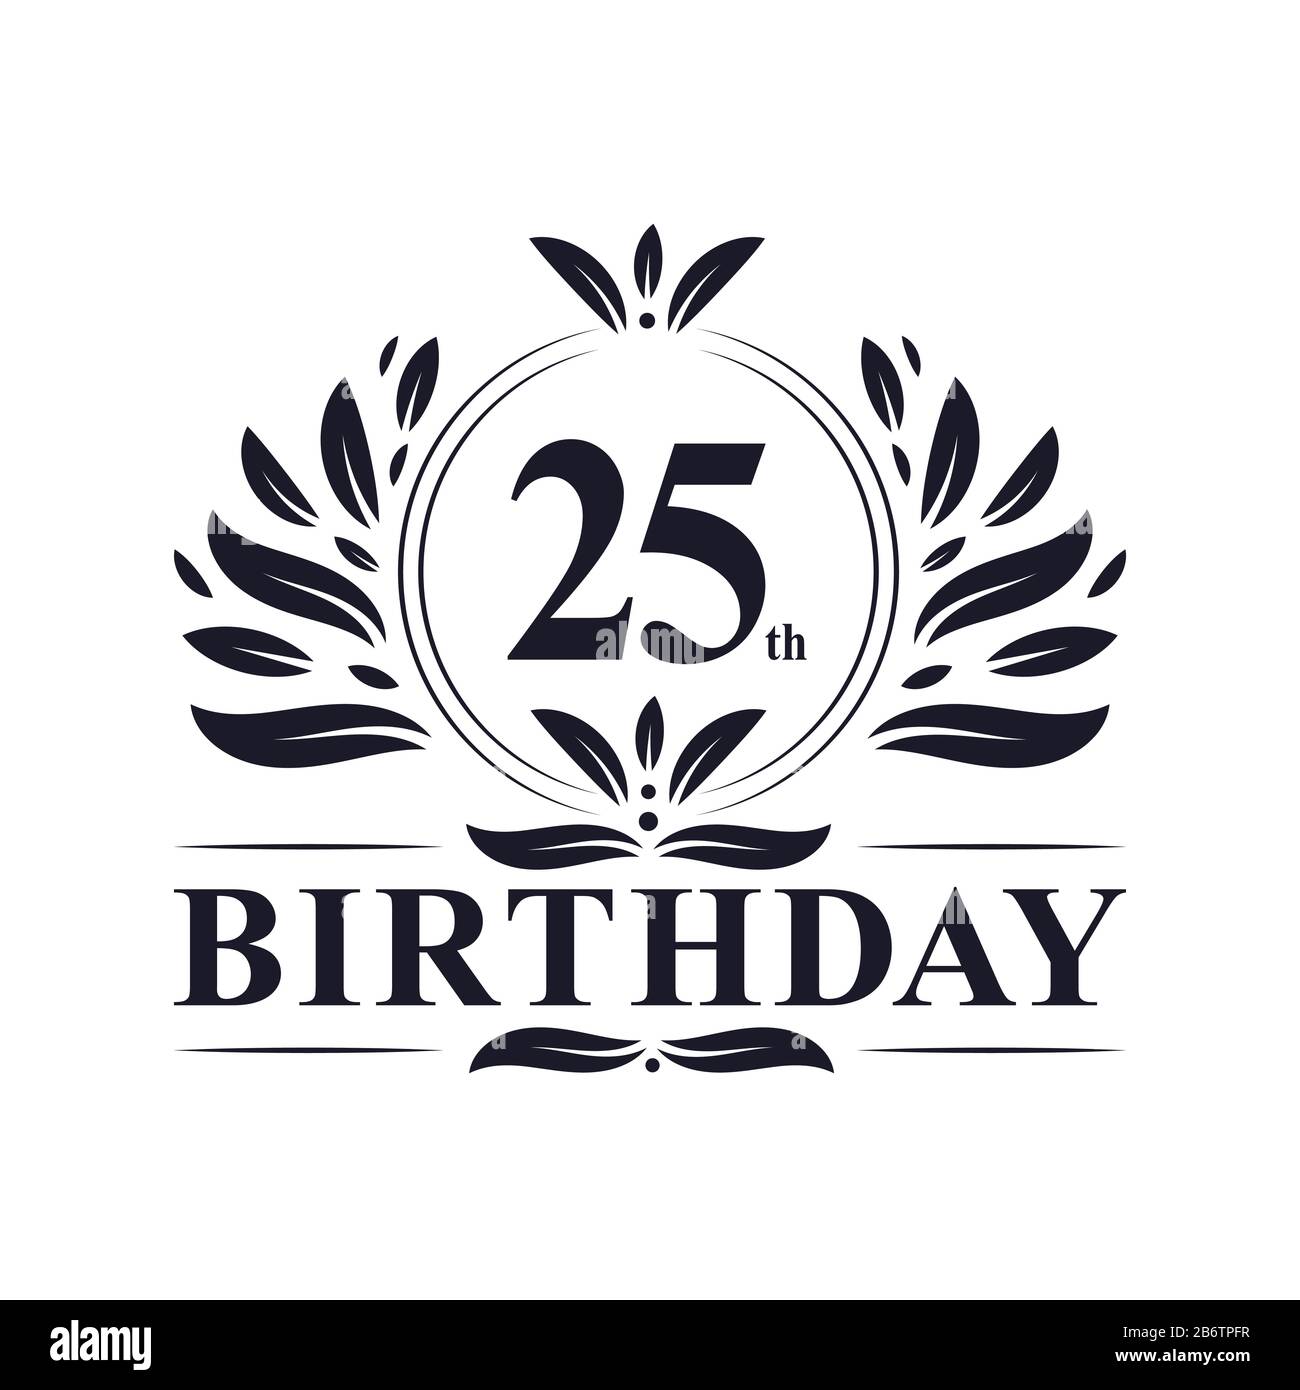 25th birthday Cut Out Stock Images & Pictures - Alamy